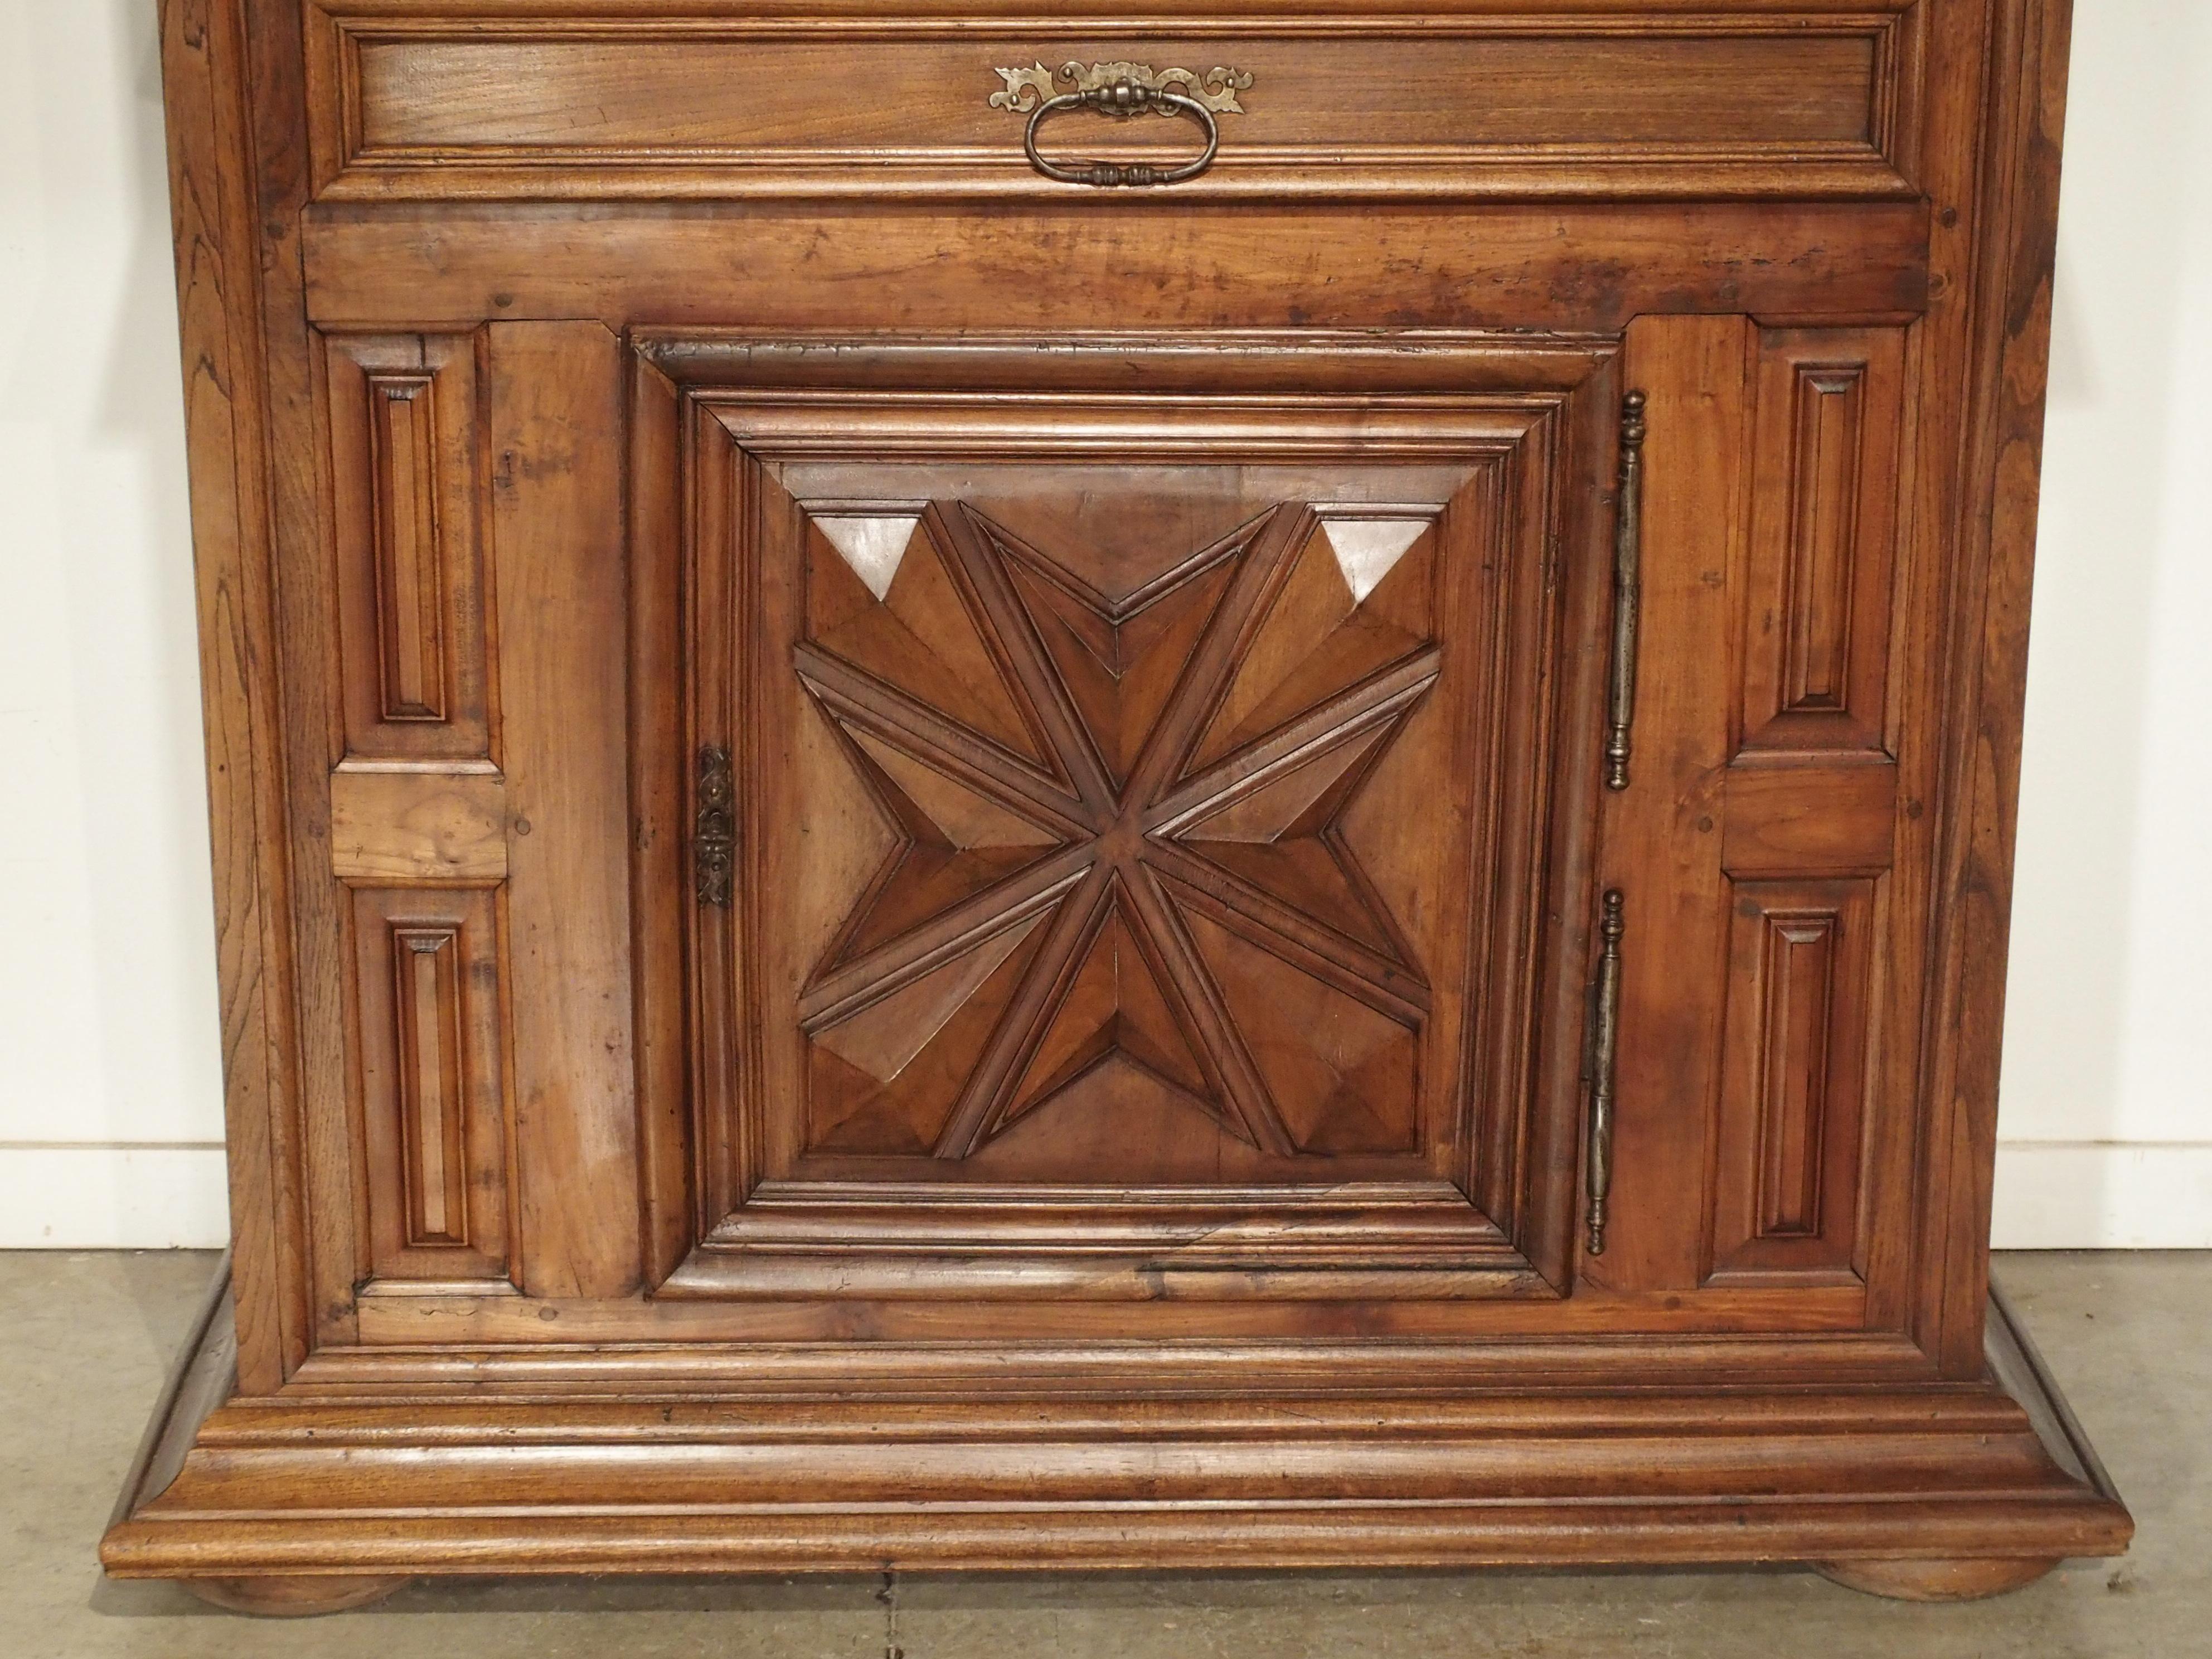 From France, this large and handsome French cabinet is known as an